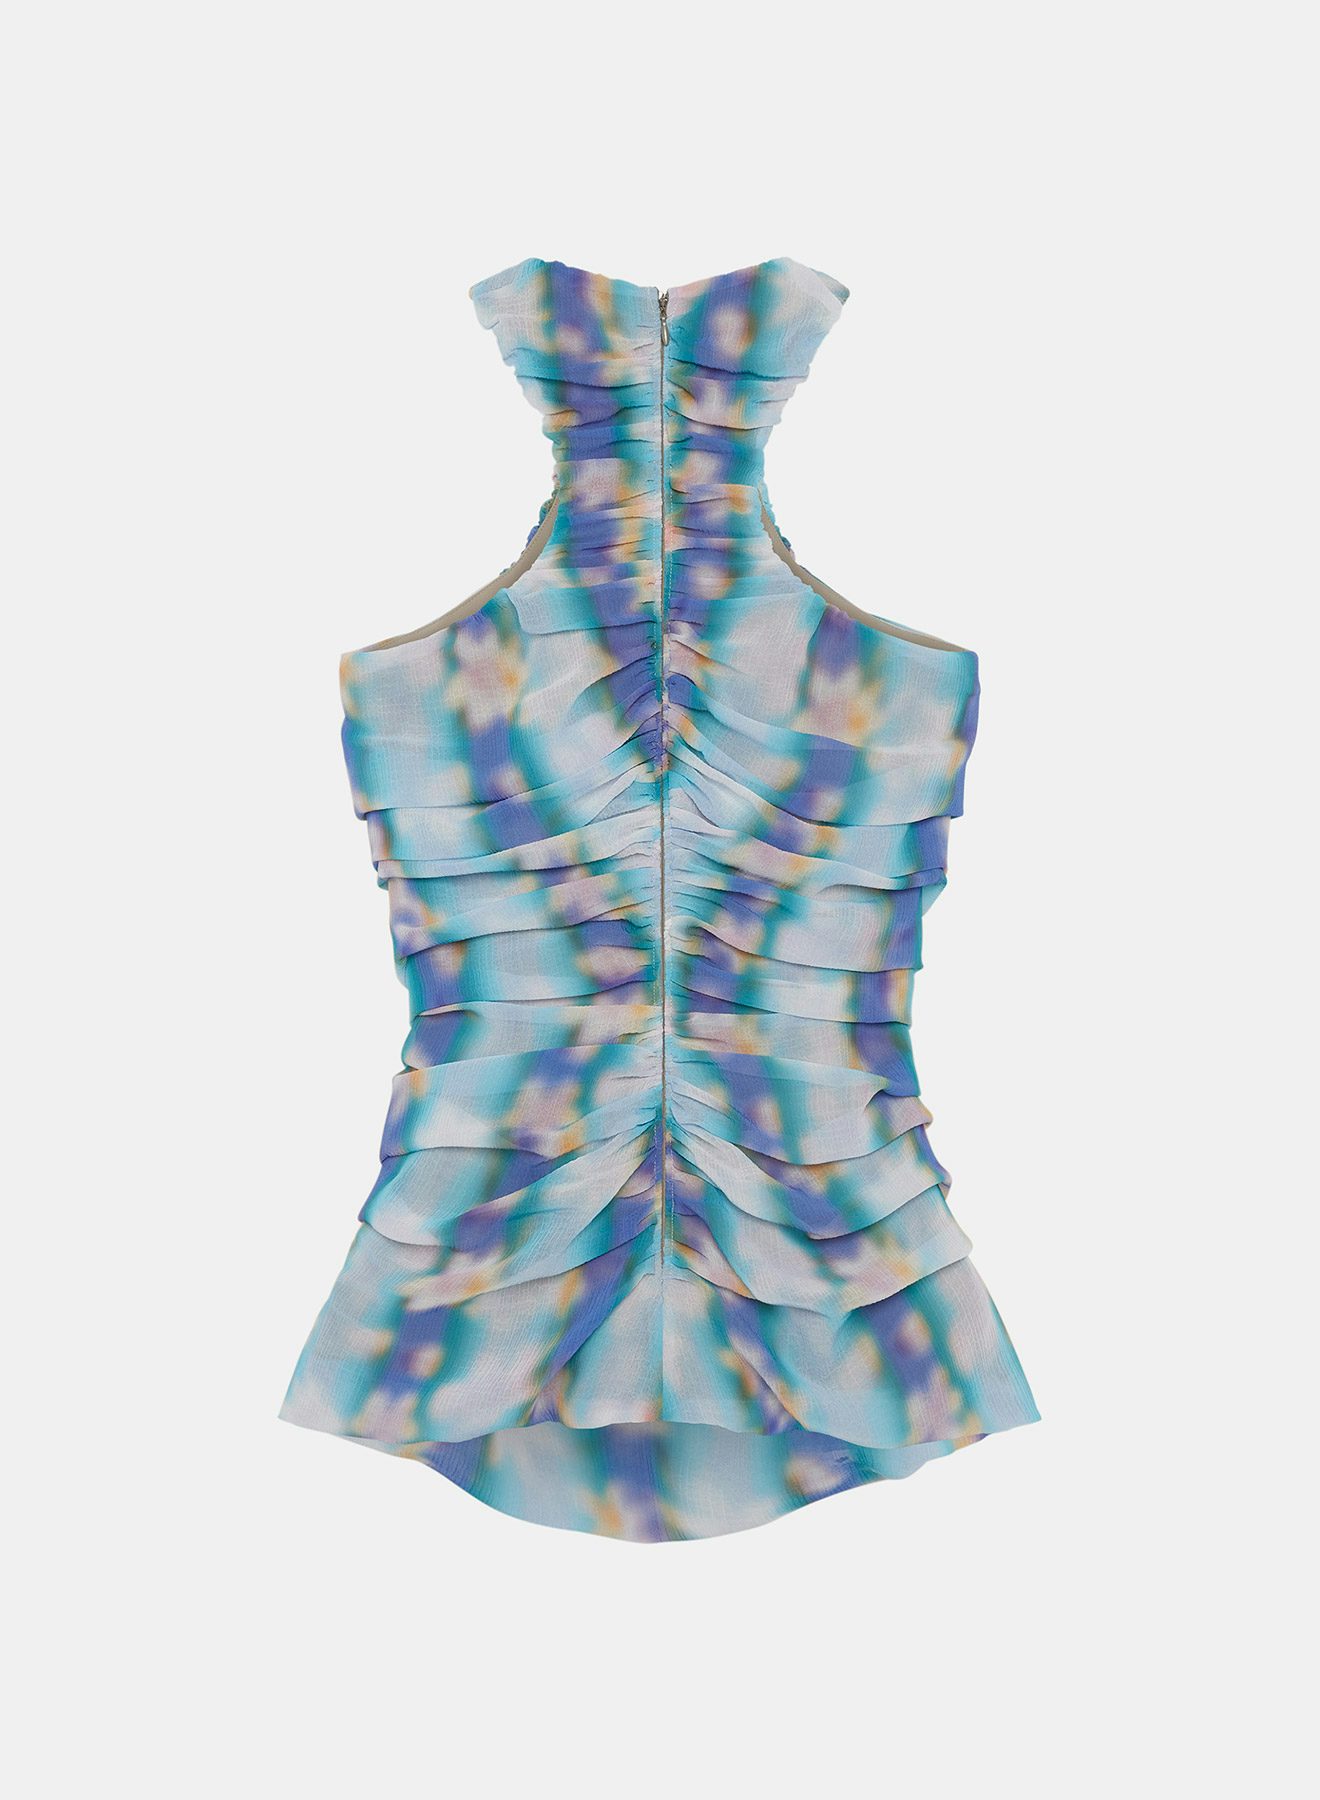 Printed Draped Sleeveless Lilac Top with Zip in the Back - Nina Ricci